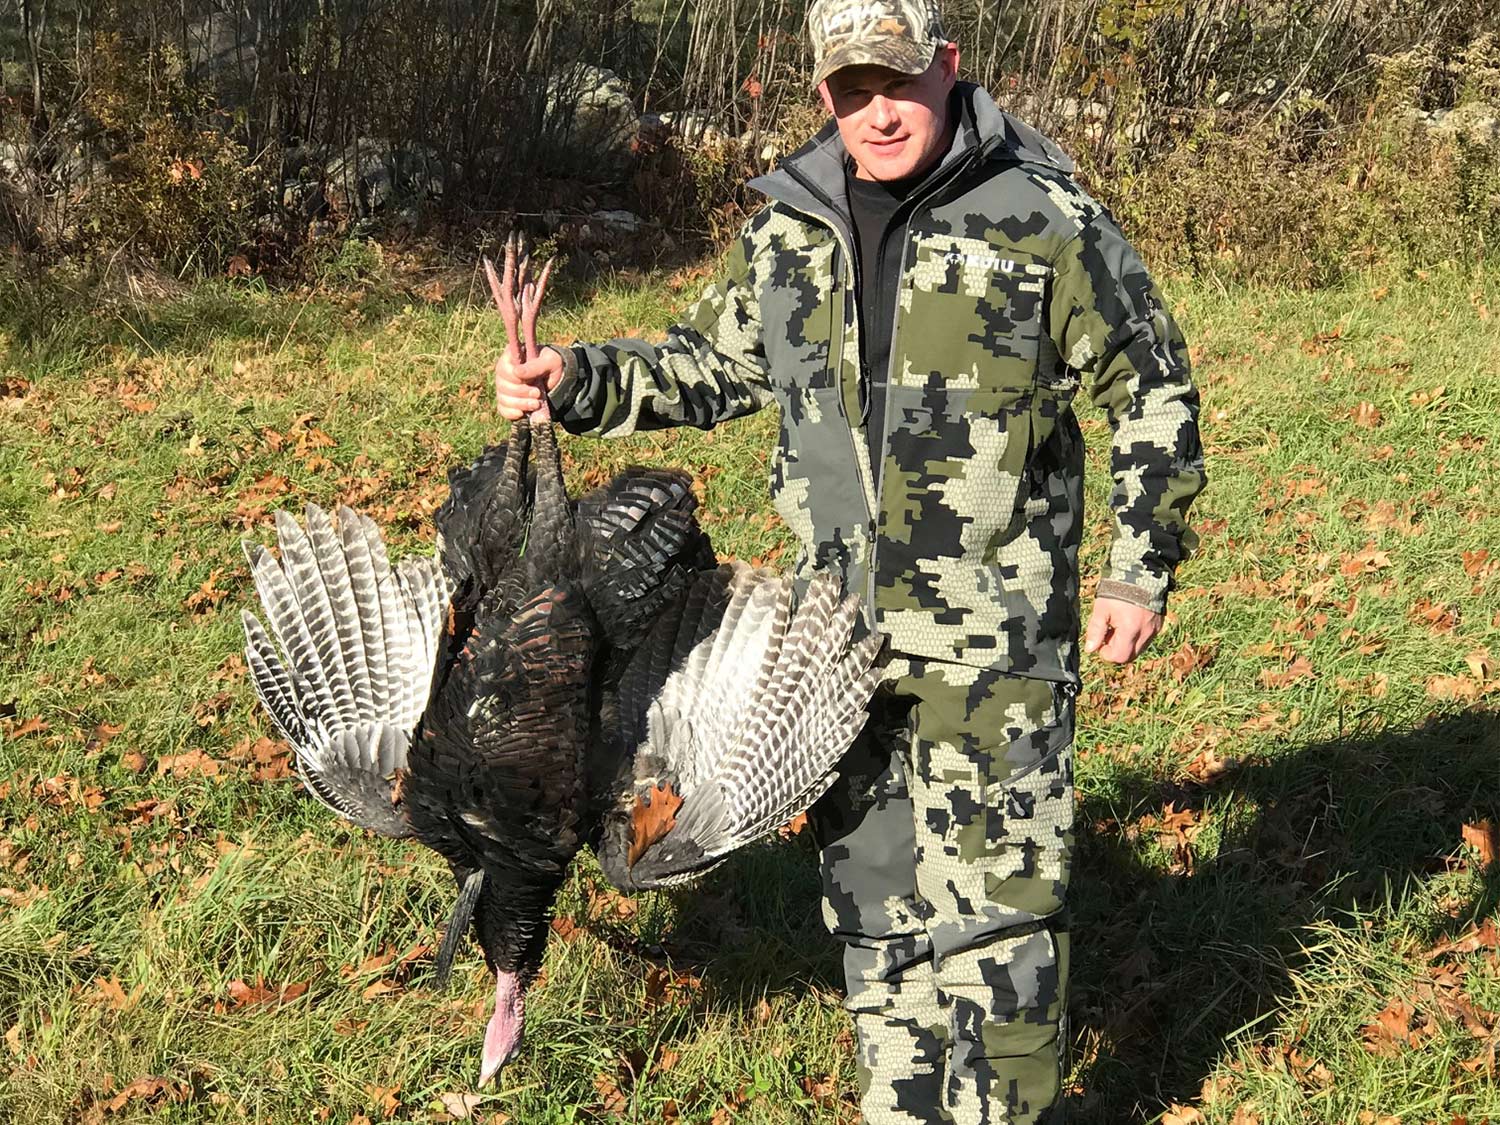 A hunter stands and holds up a turkey by its legs.